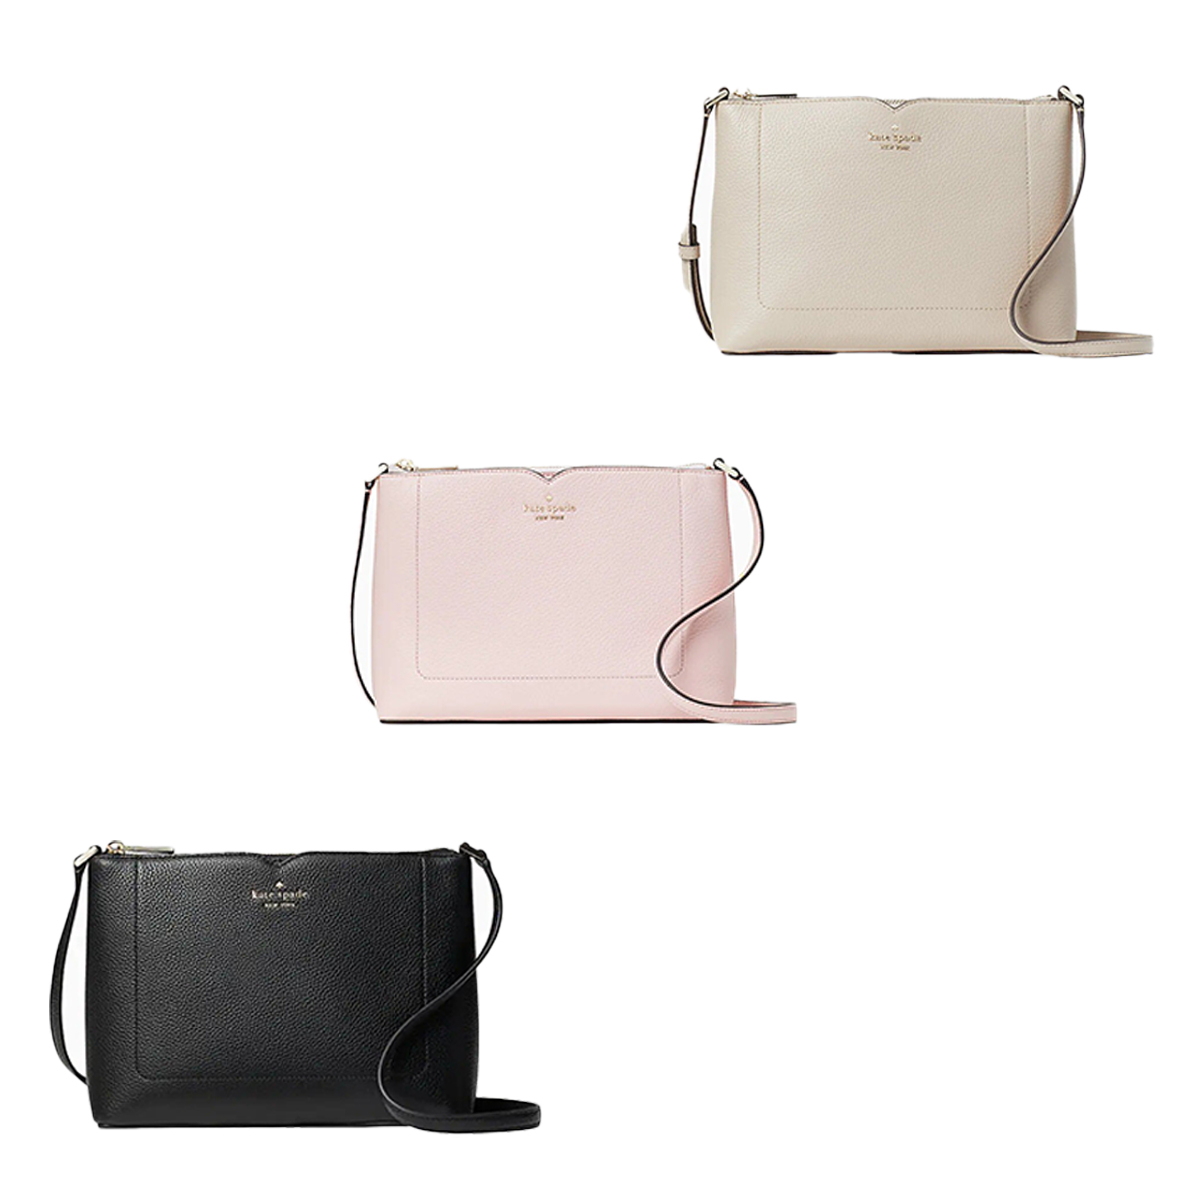 Coach and Kate Spade bags and wallets - clothing & accessories - by owner -  apparel sale - craigslist